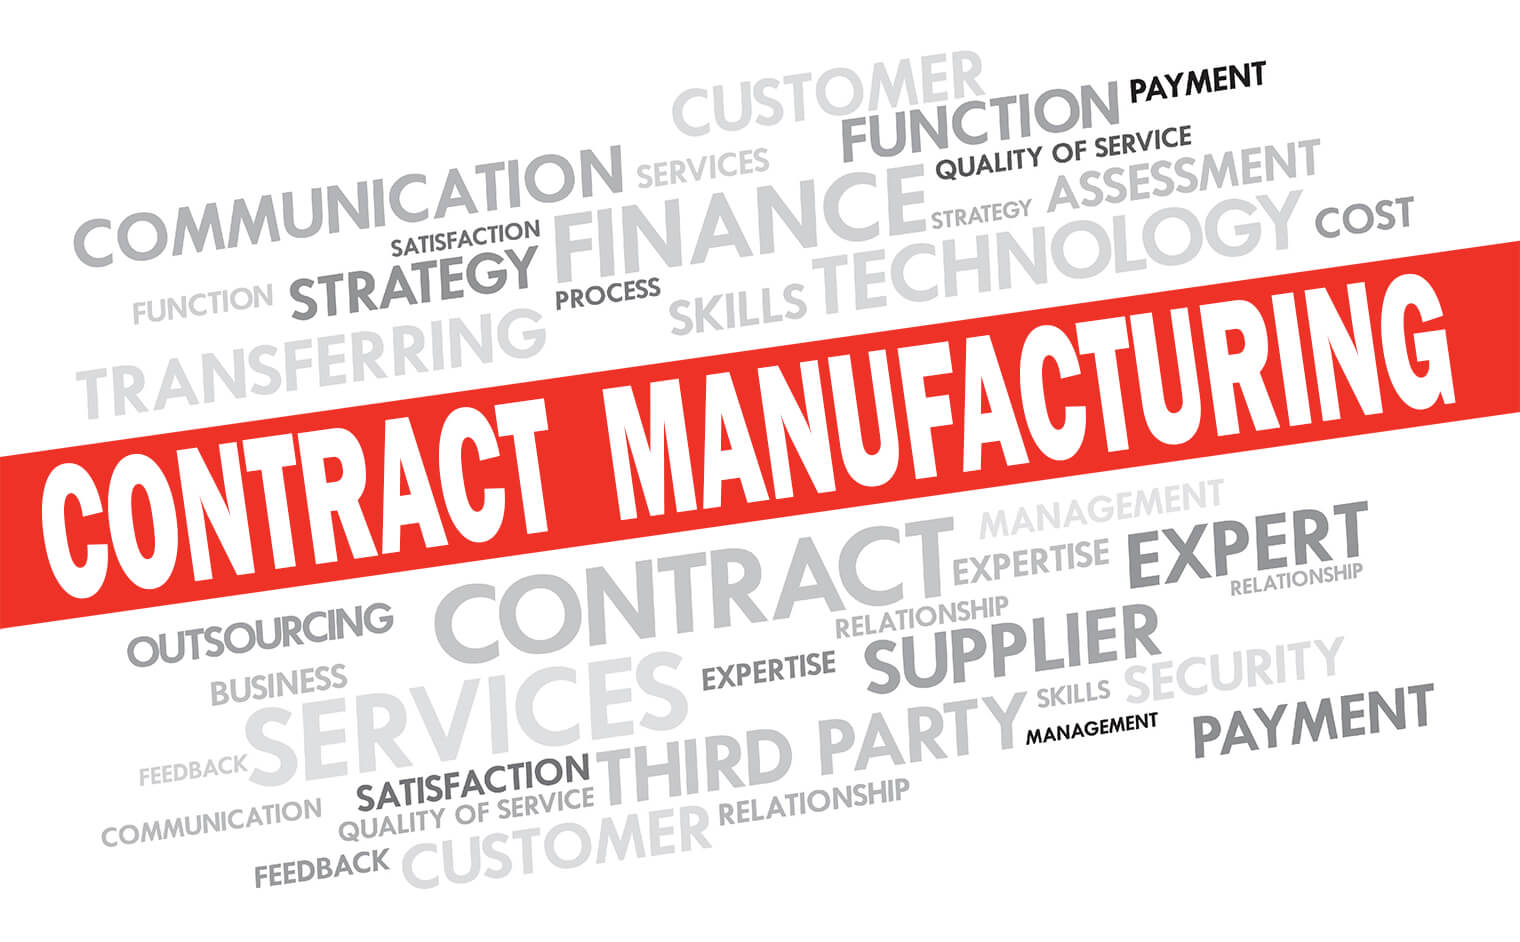 Word Cloud representing Contract Manufacturing